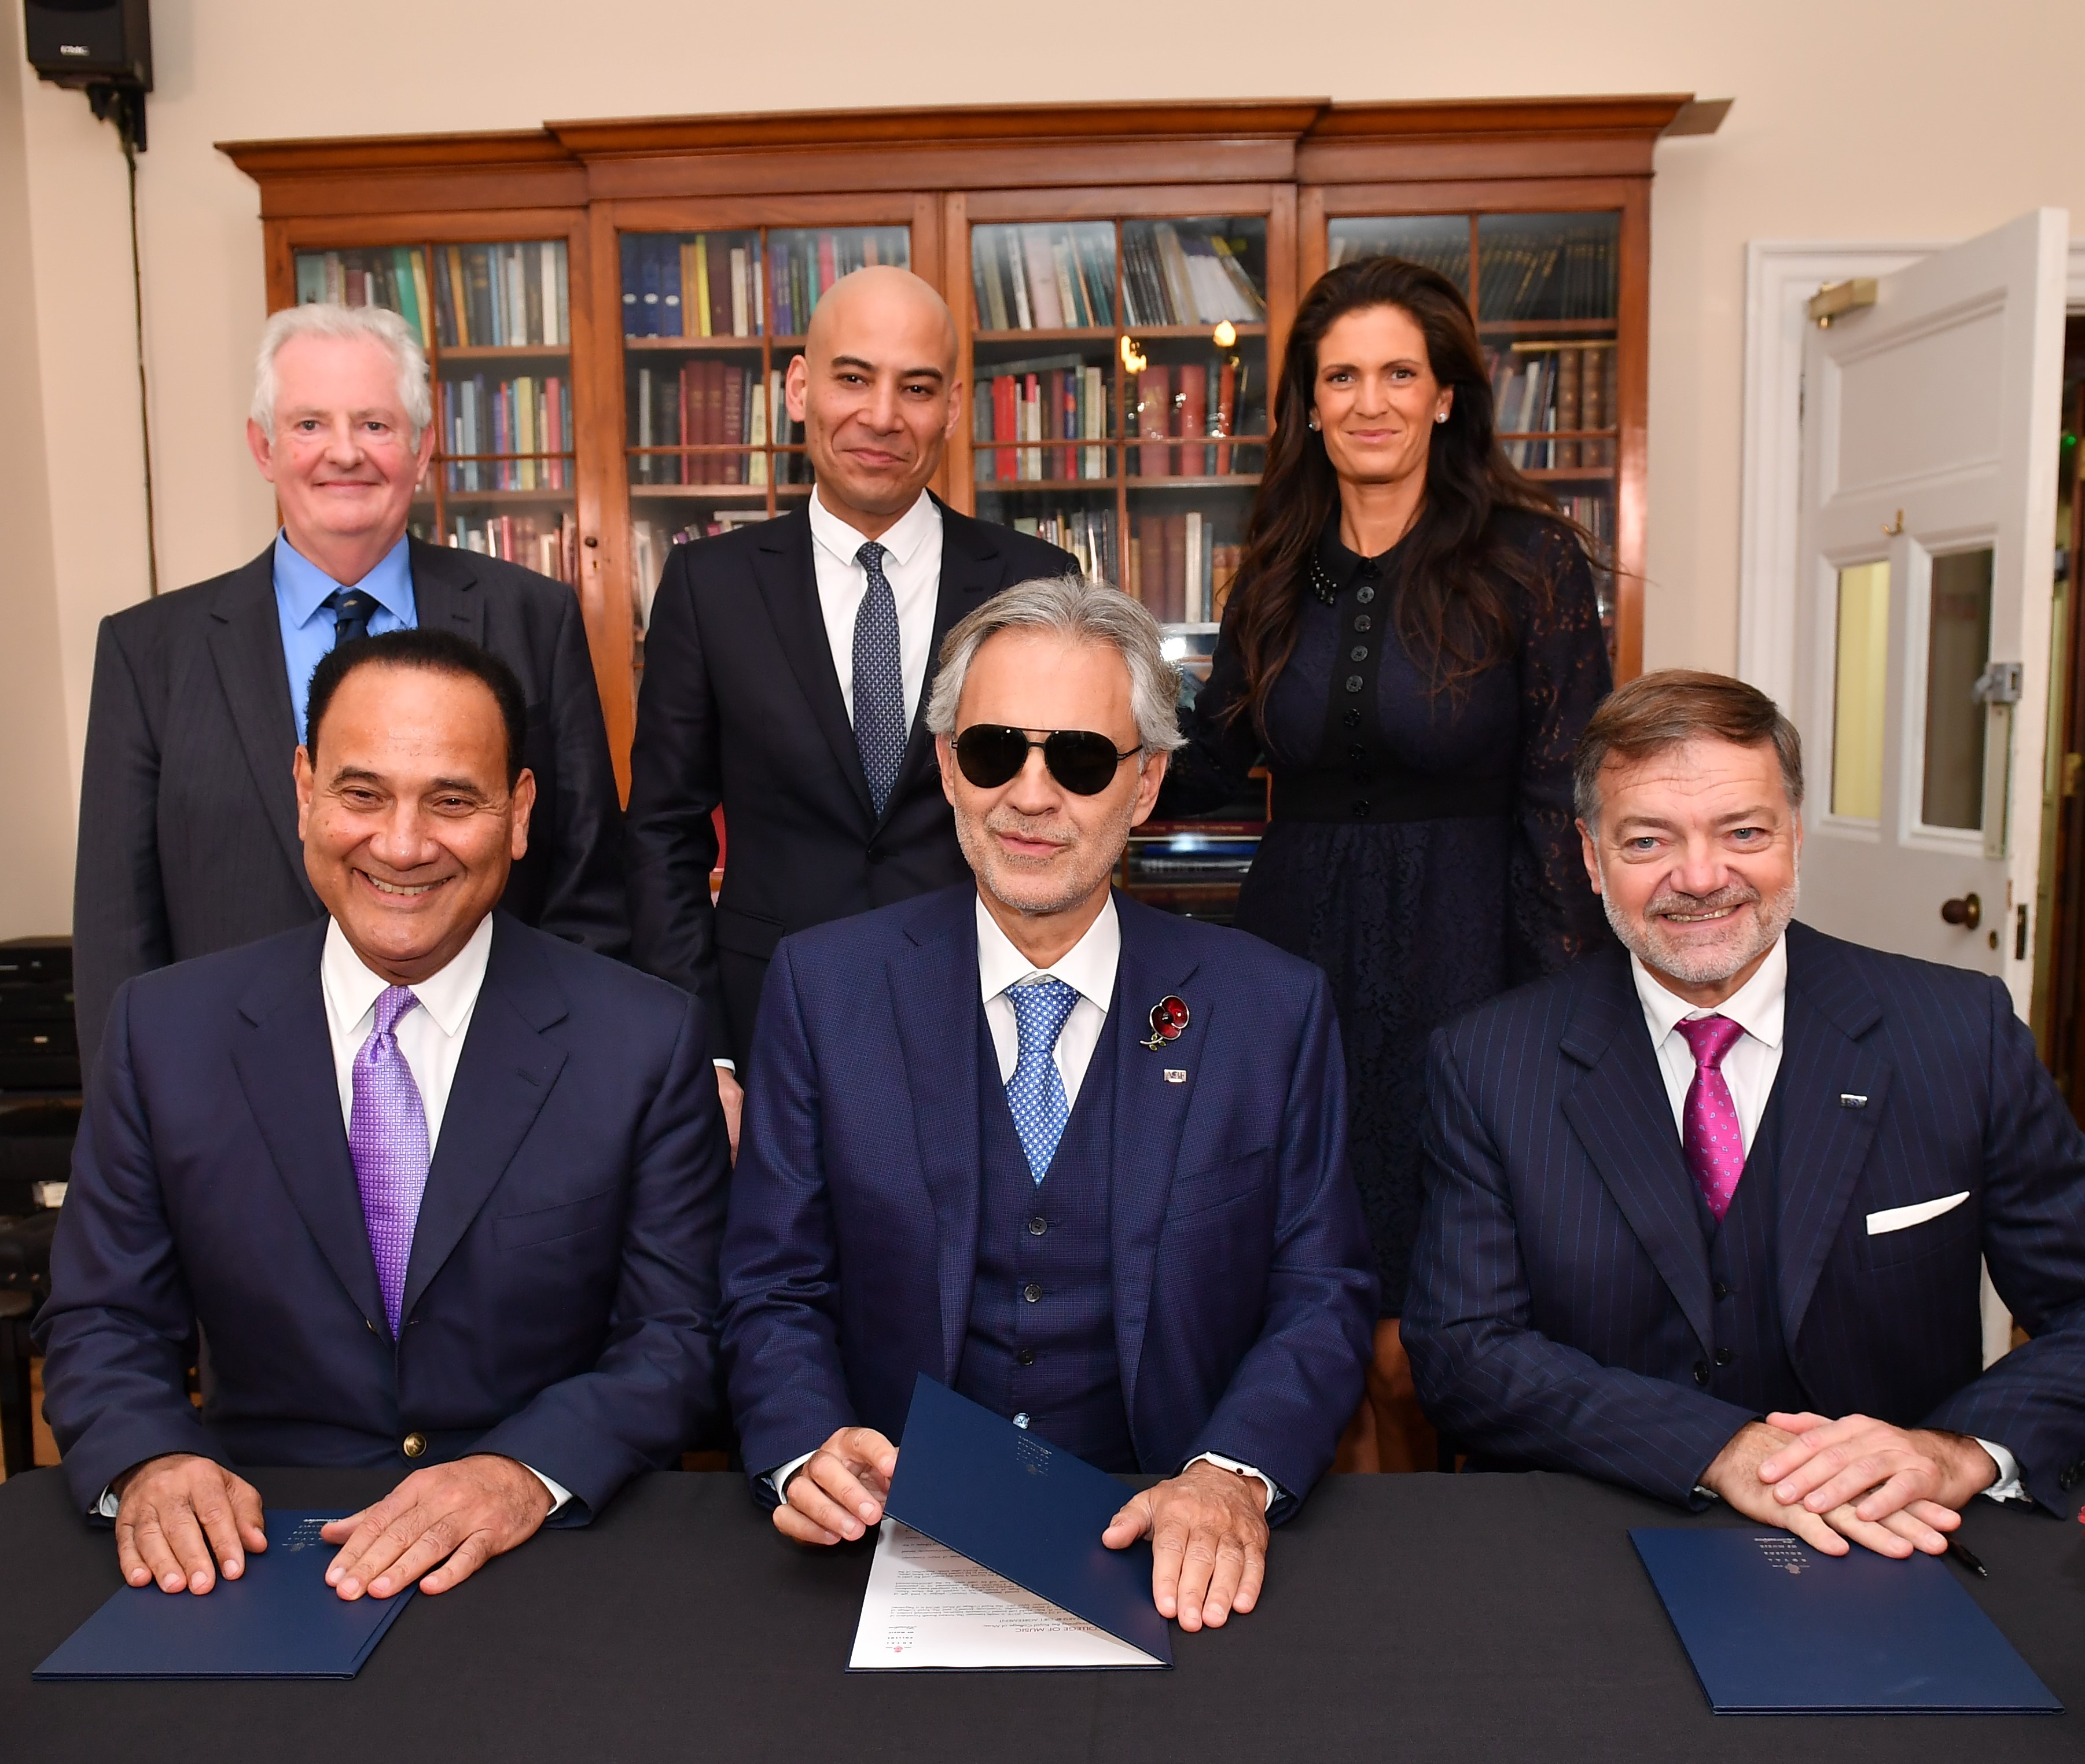 Andrea Bocelli launches the scholarship